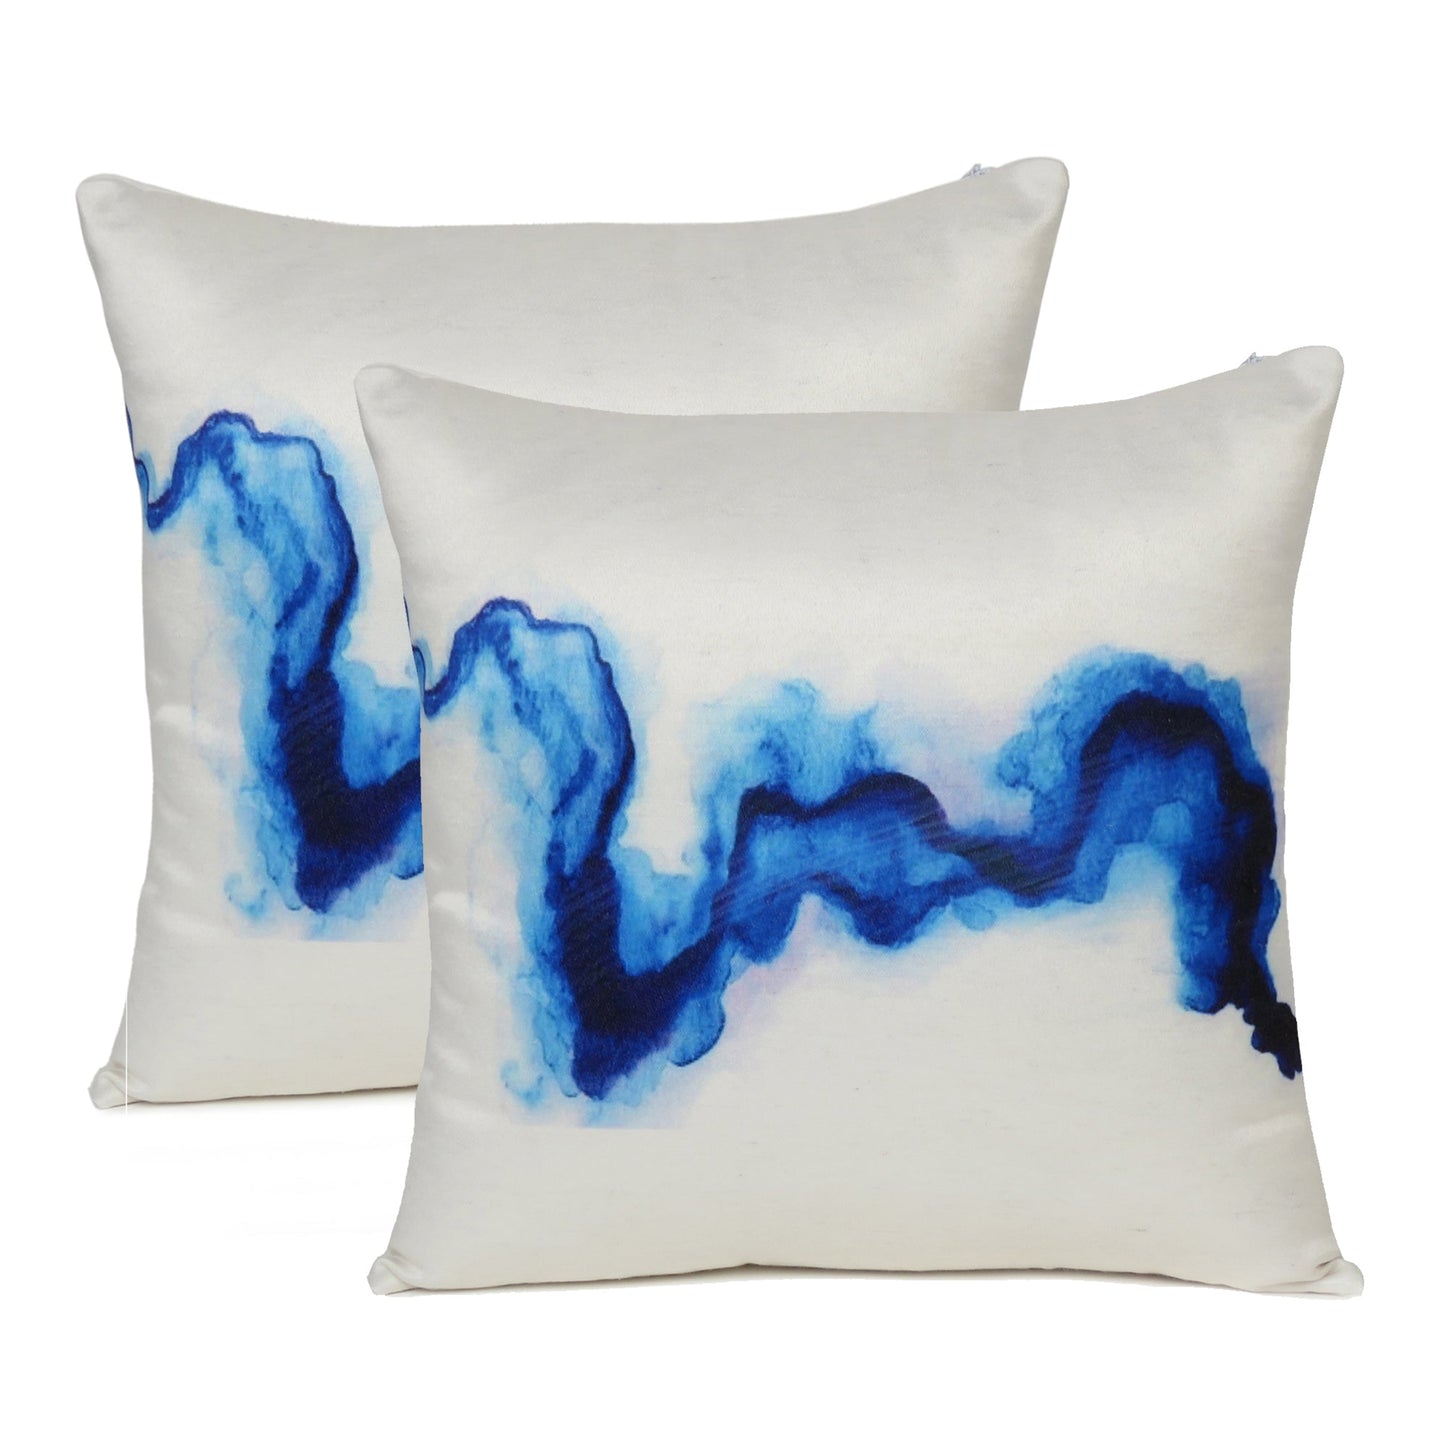 White Ink Spread Printed Cushion Cover in Set of 2